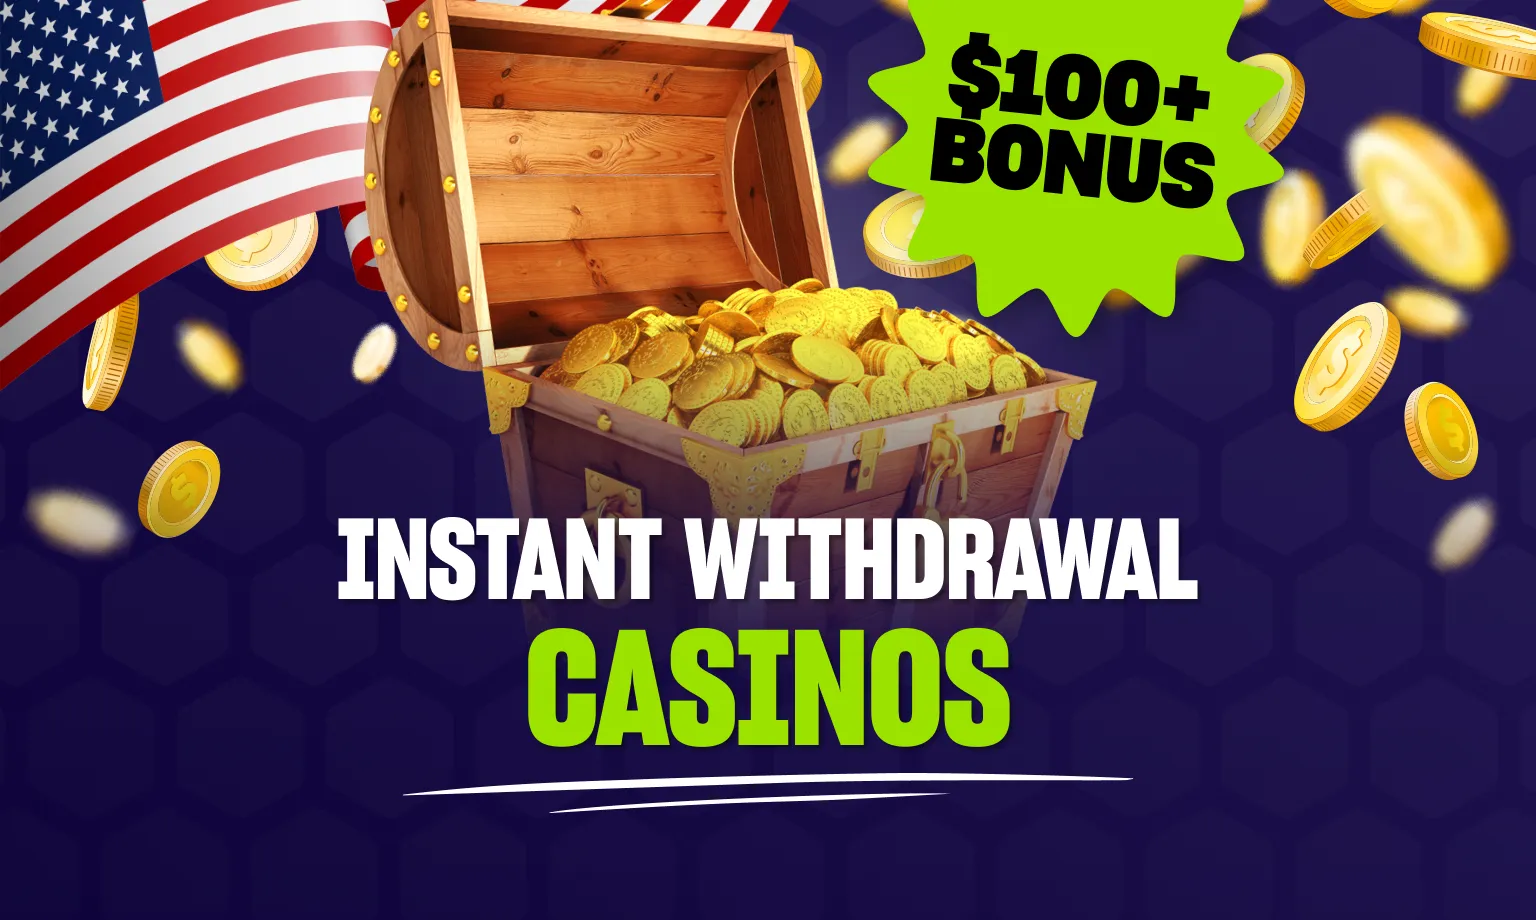 Instant Withdrawal Casino Bonuses 🎖️ $125 FREE + 100 FREE SPINS